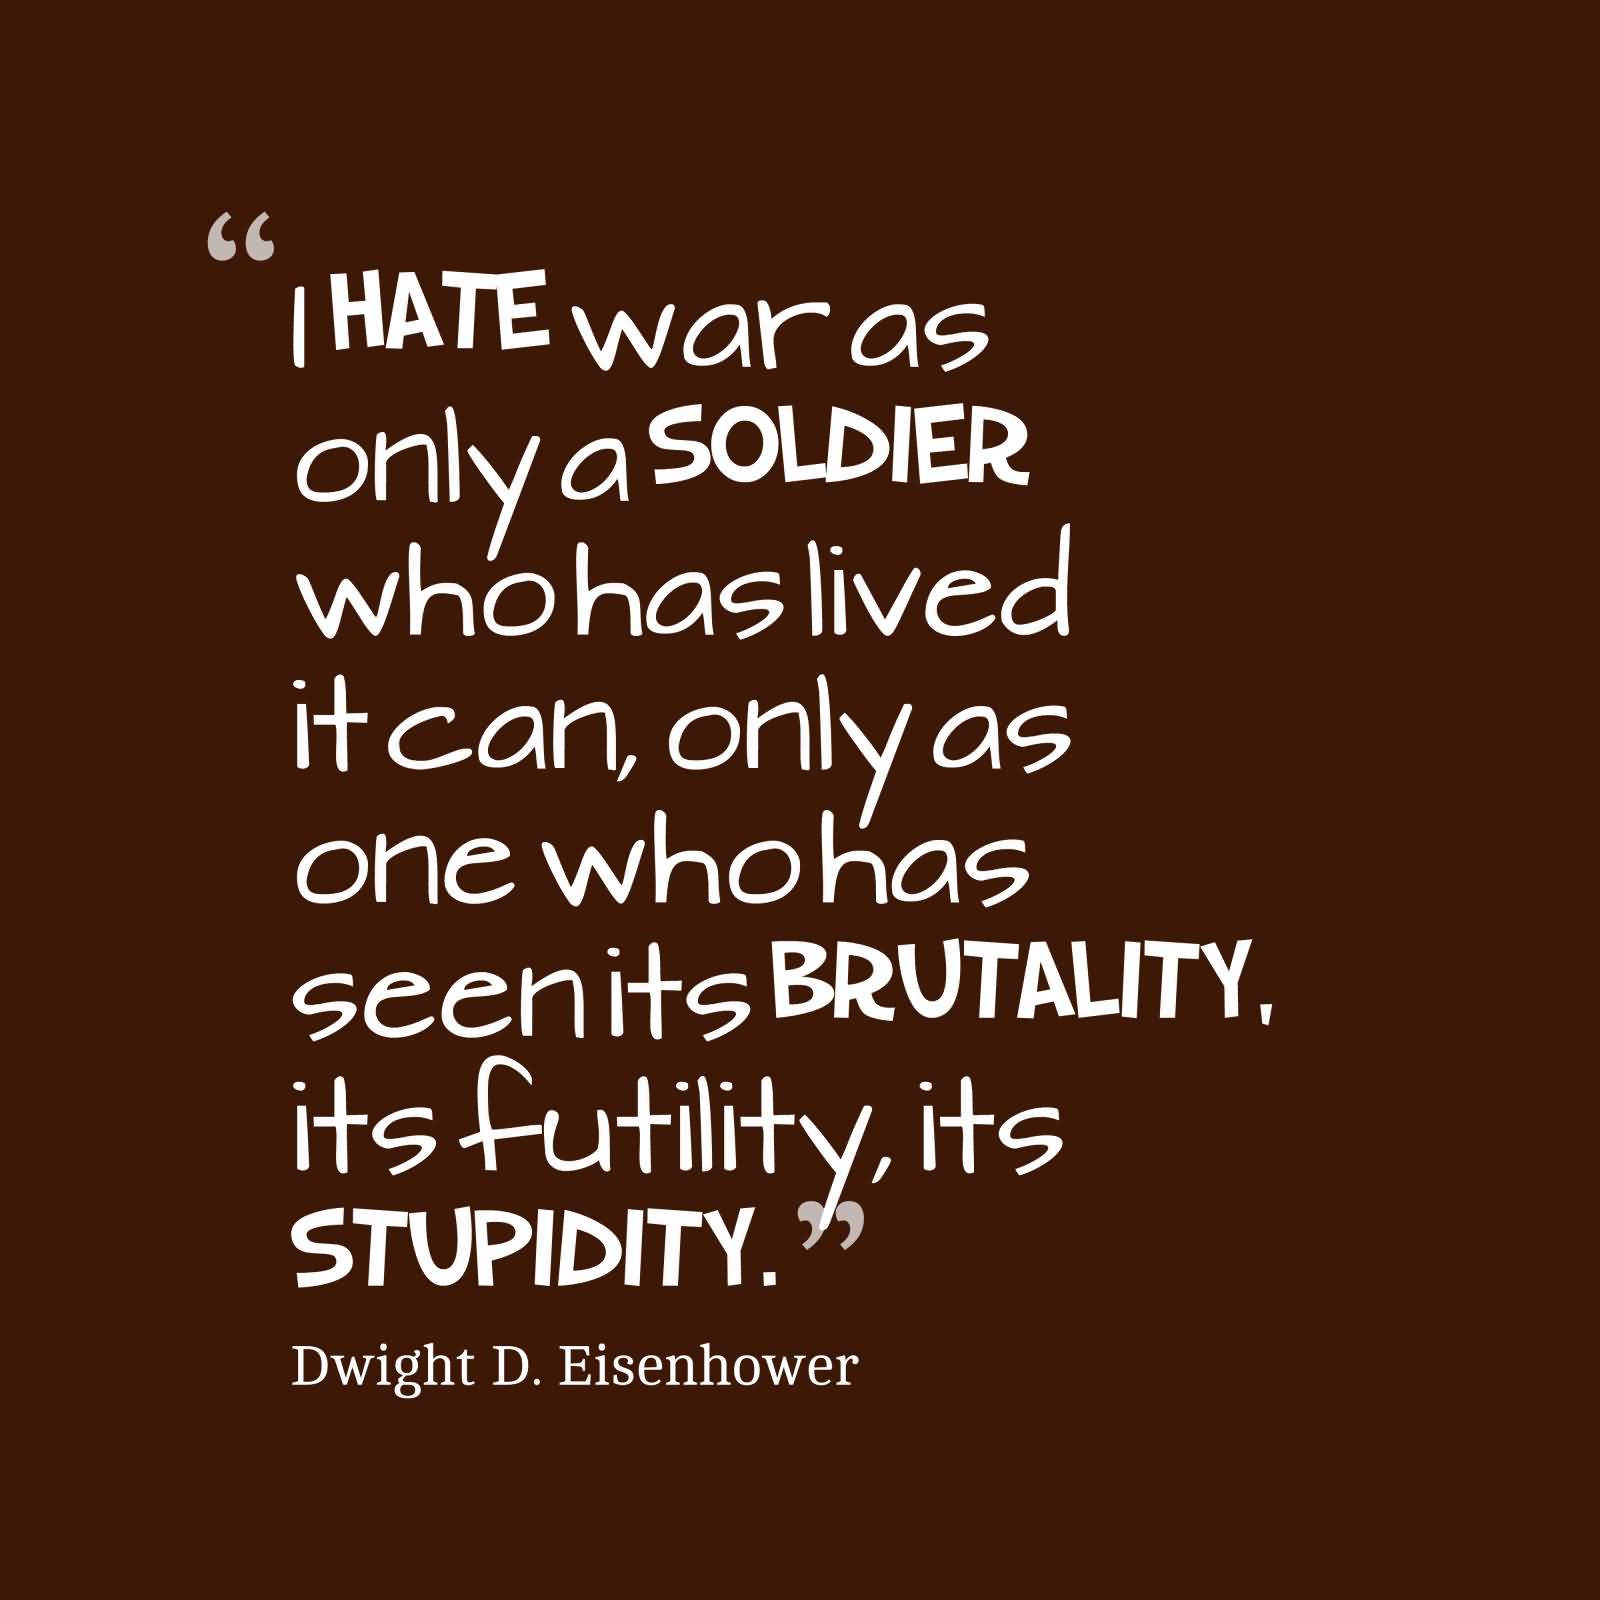 I hate war as only a soldier who has lived it can, only as one who has seen its brutality, its futility, its stupidity - Dwight D. Eisenhower